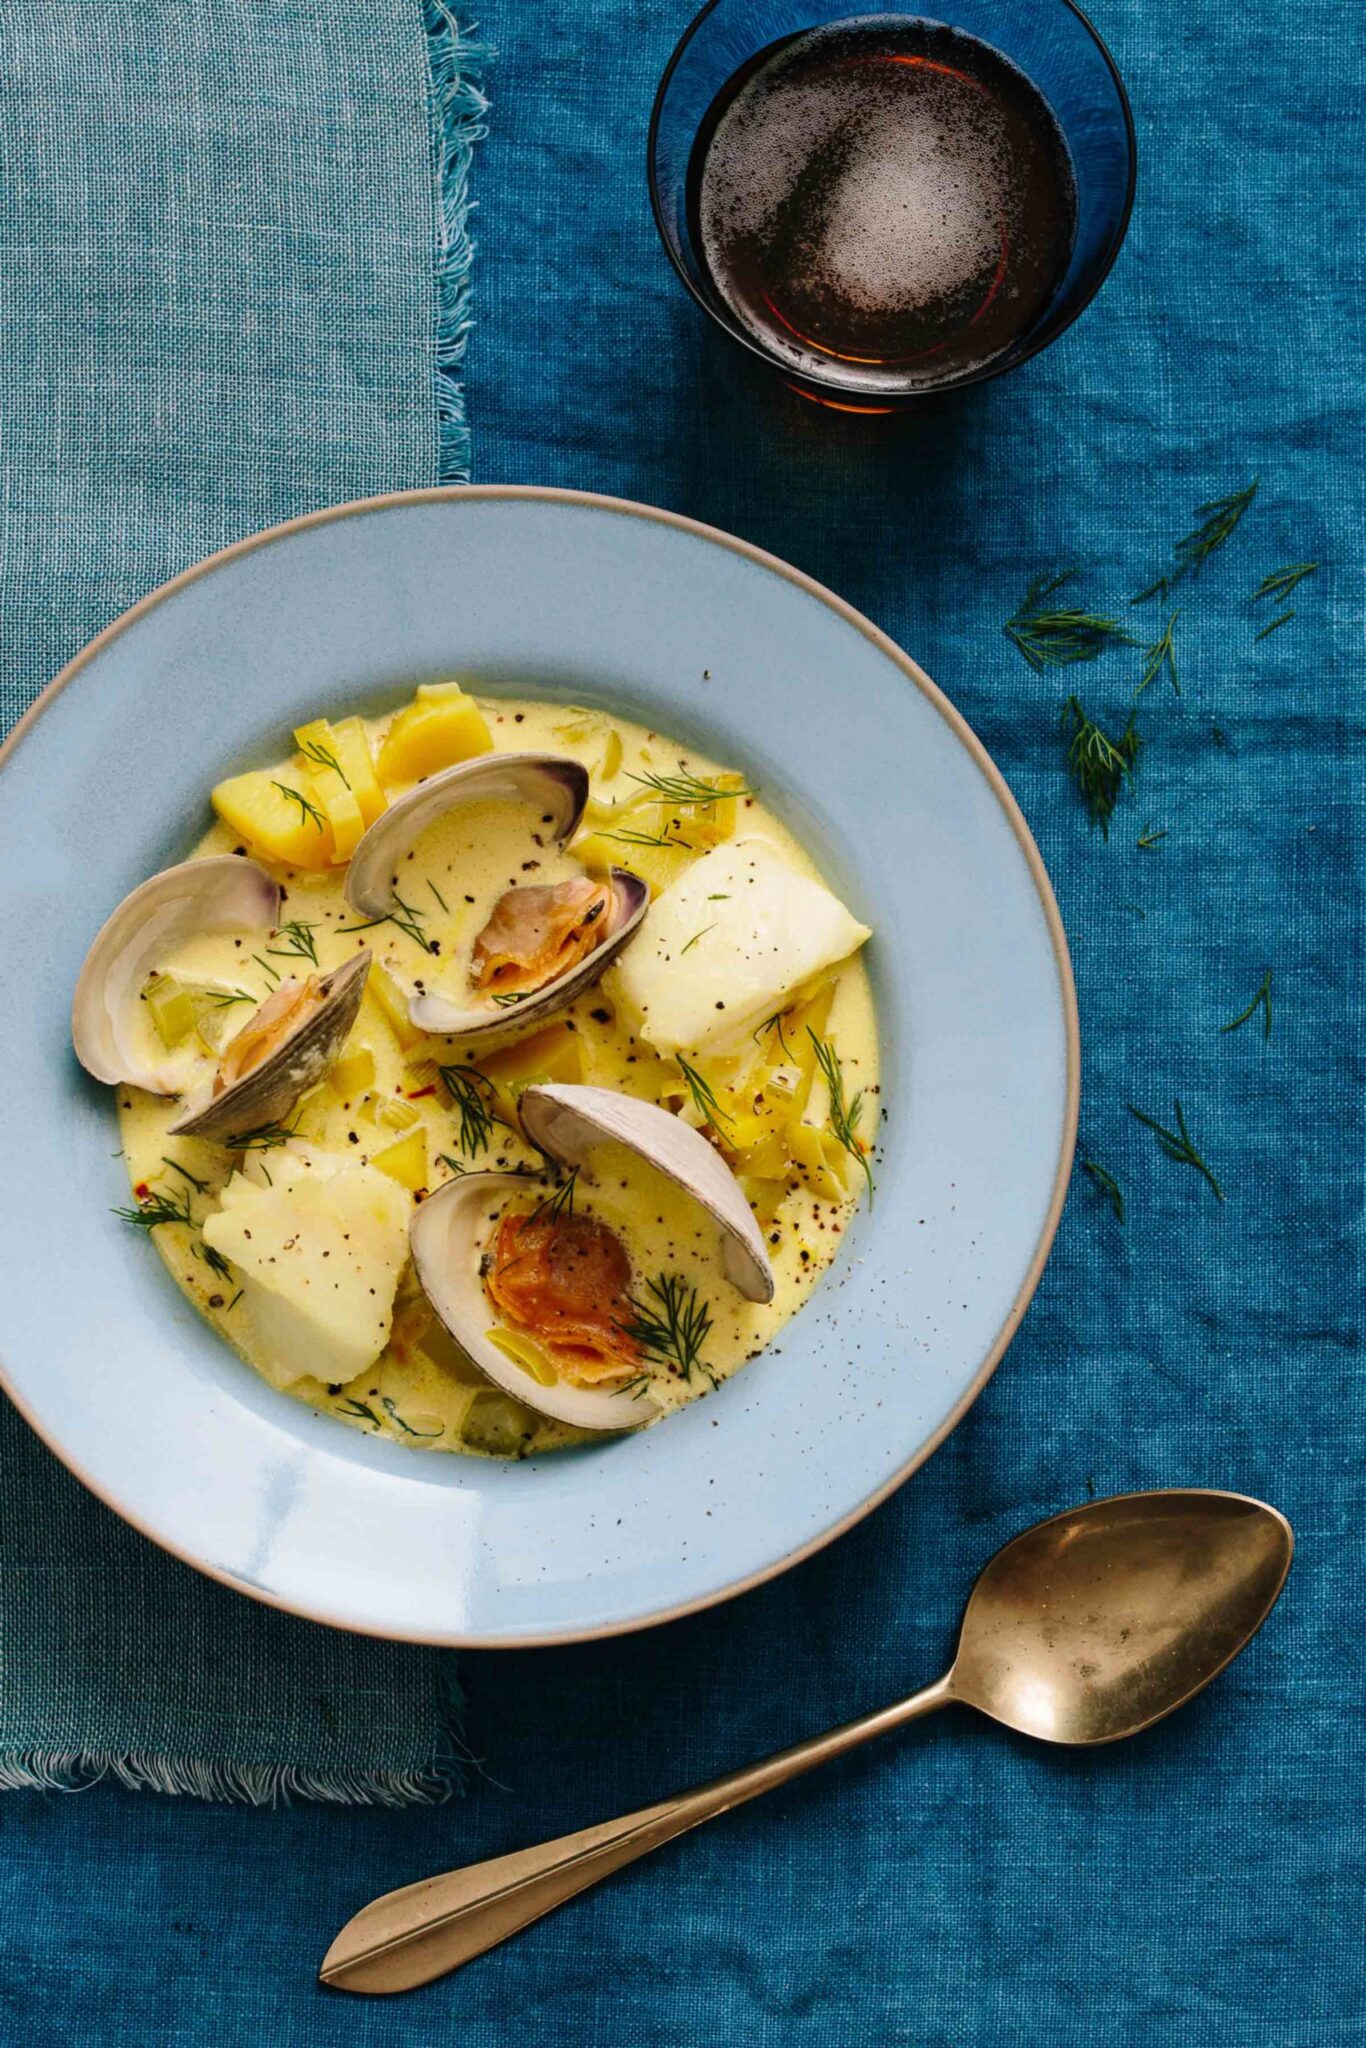 classic gluten-free saffron seafood chowder recipe with clams and cod